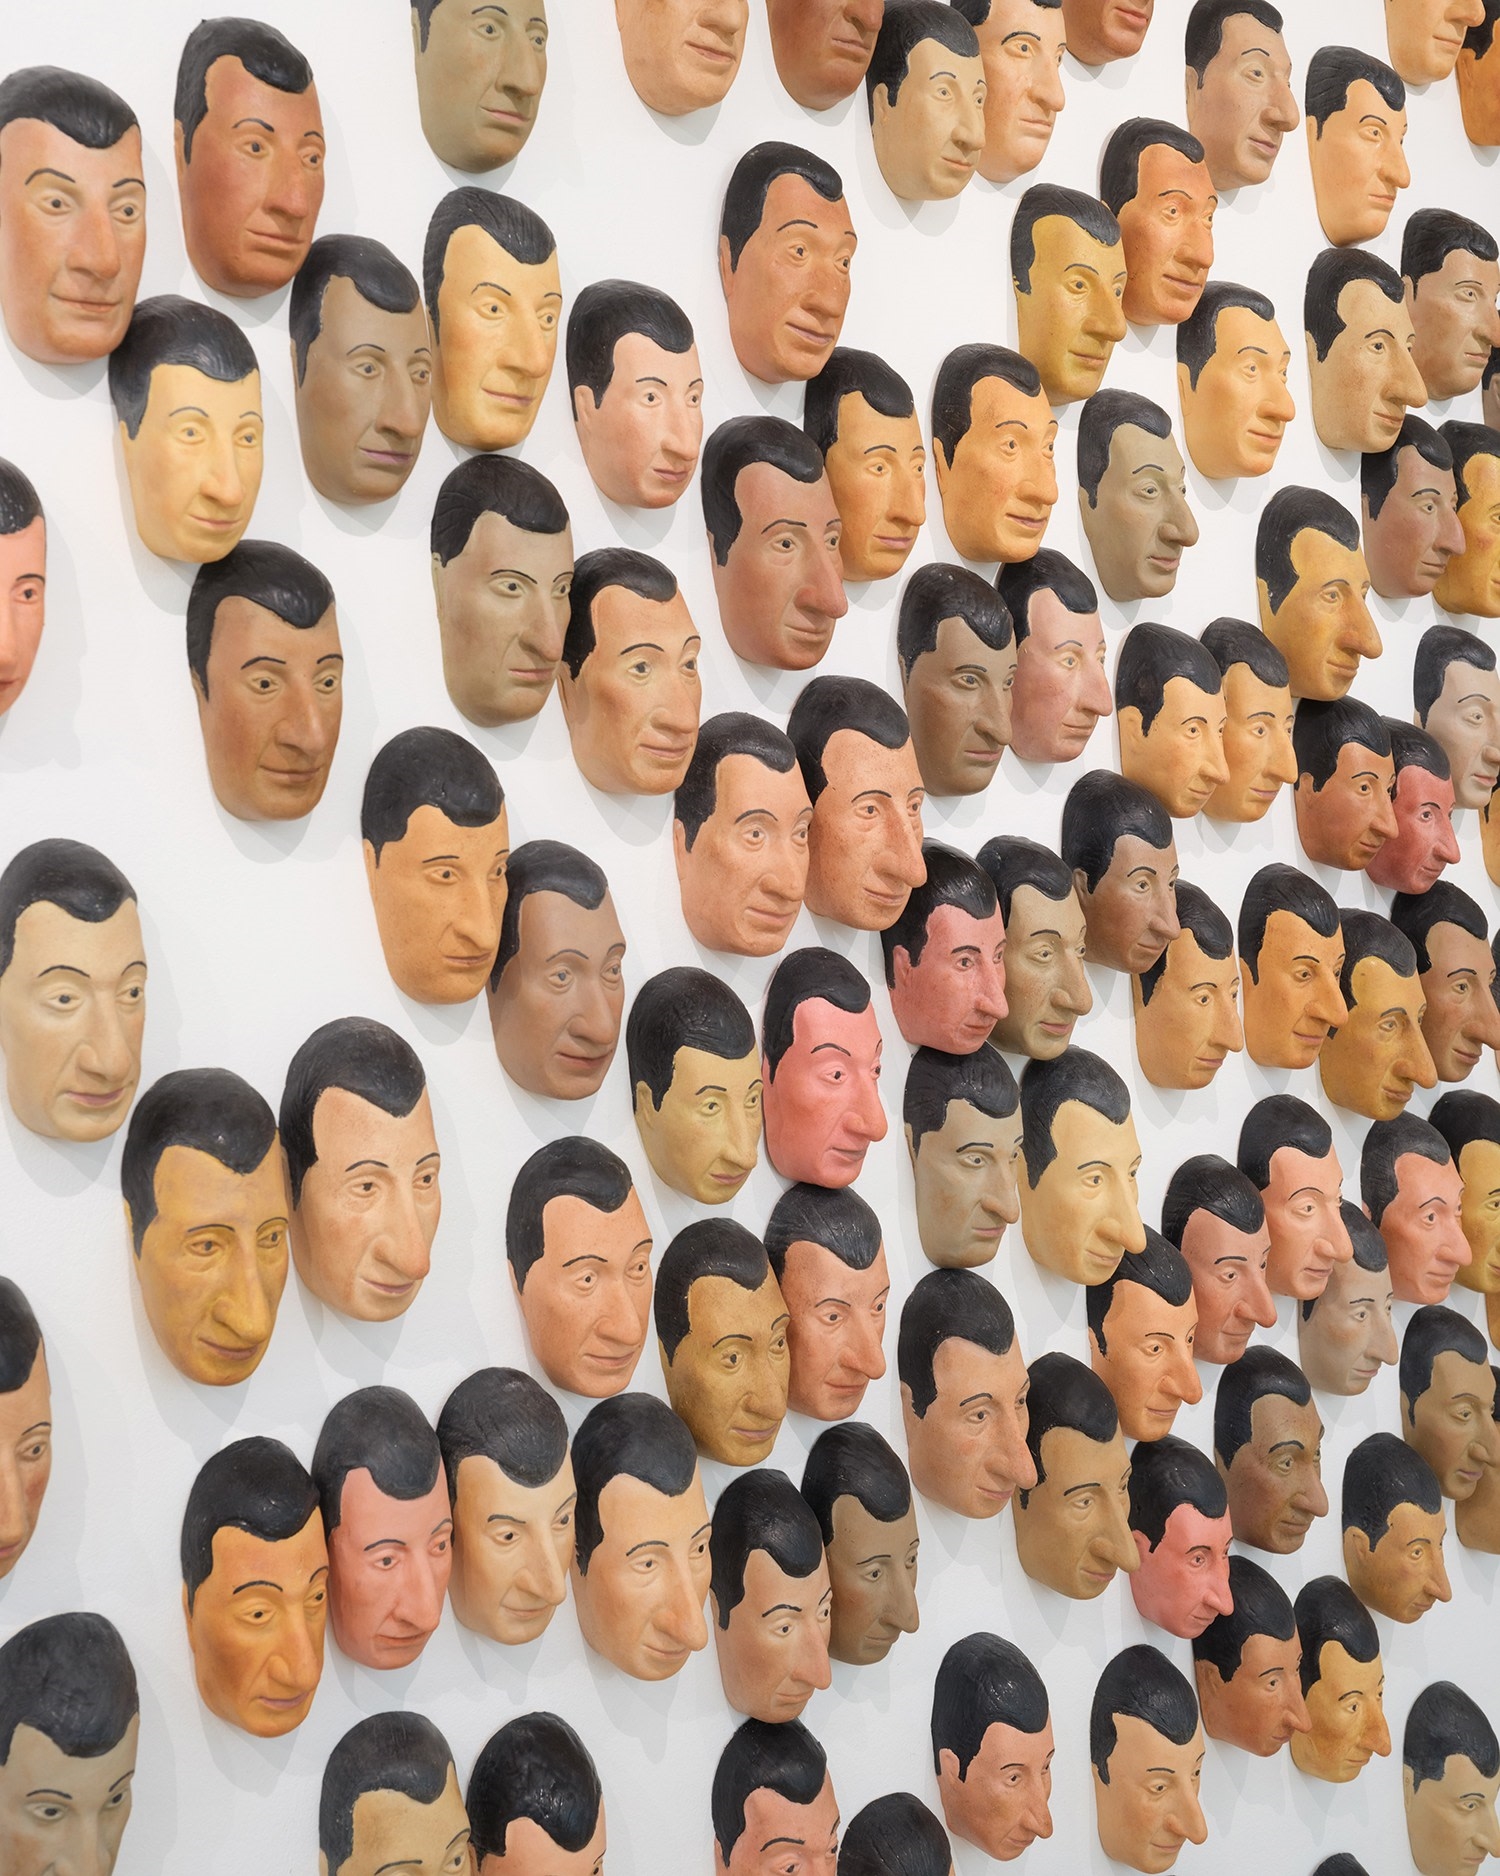 Artwork by Maurizio Cattelan, Spermini, Made of painted latex, in 250 parts